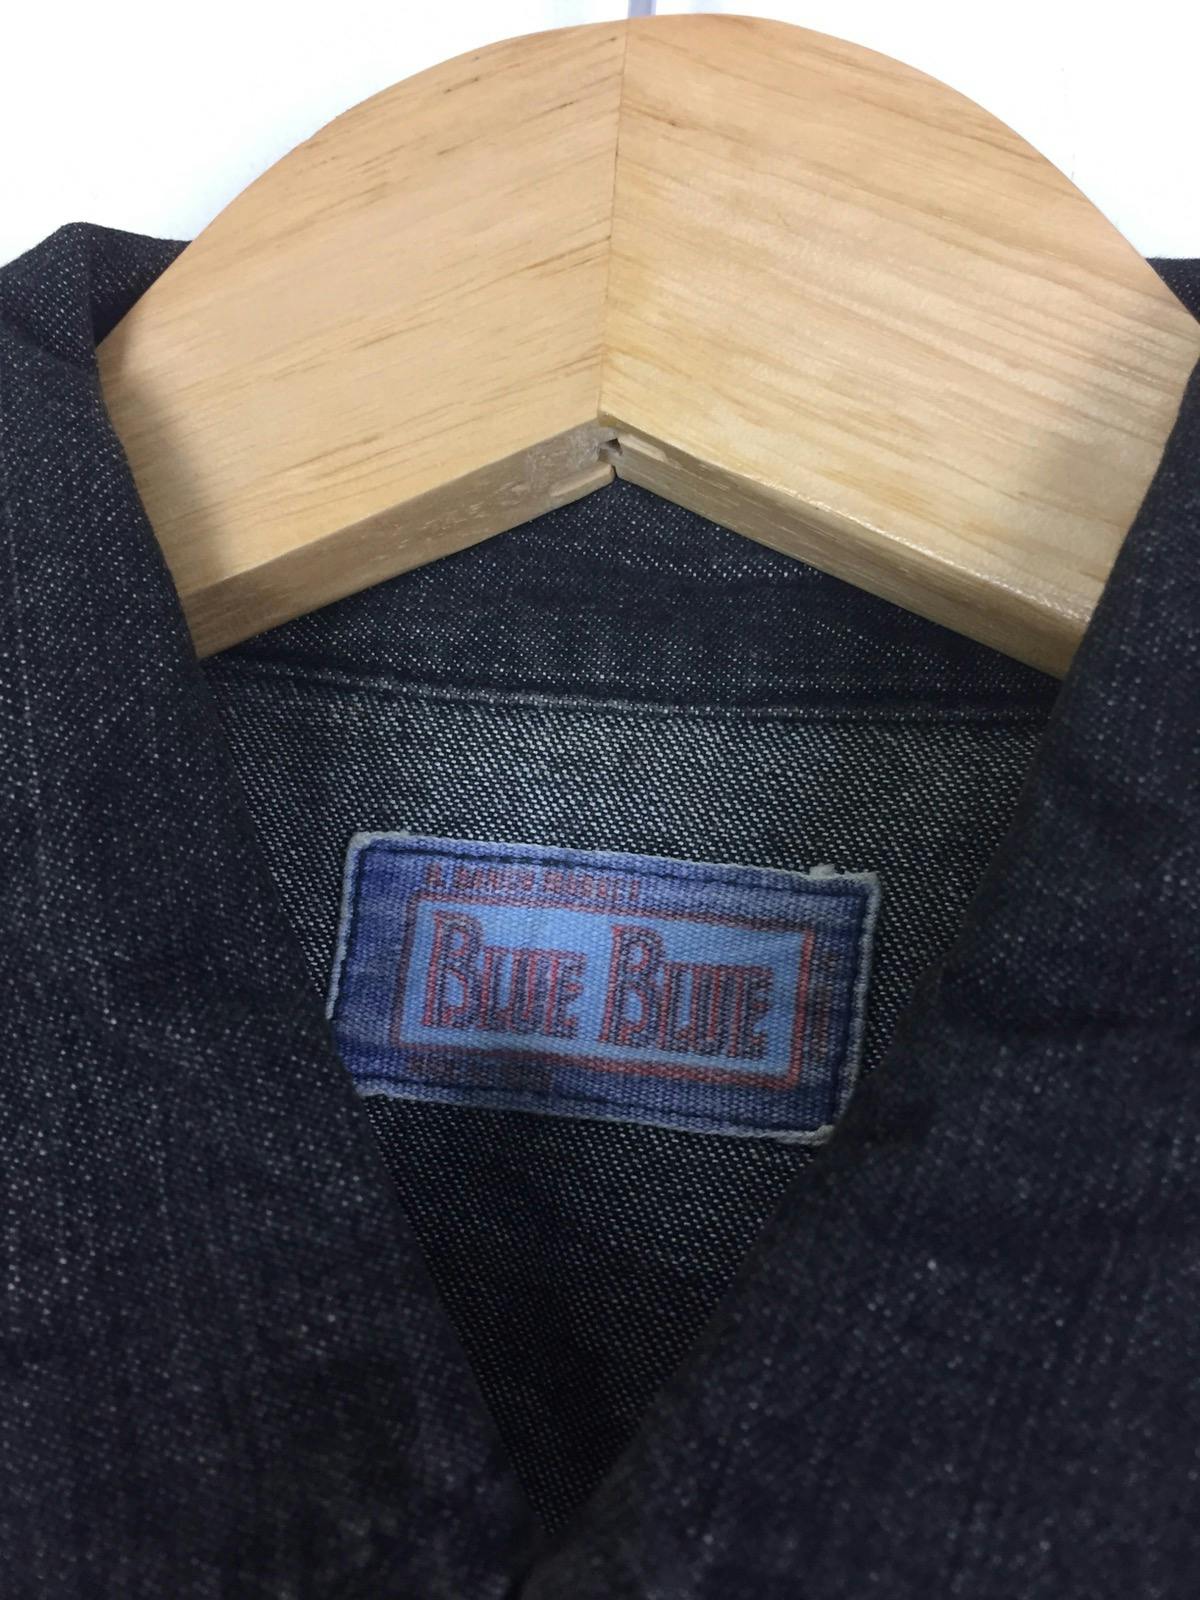 Blue blue western shirt button down made in japan - 3